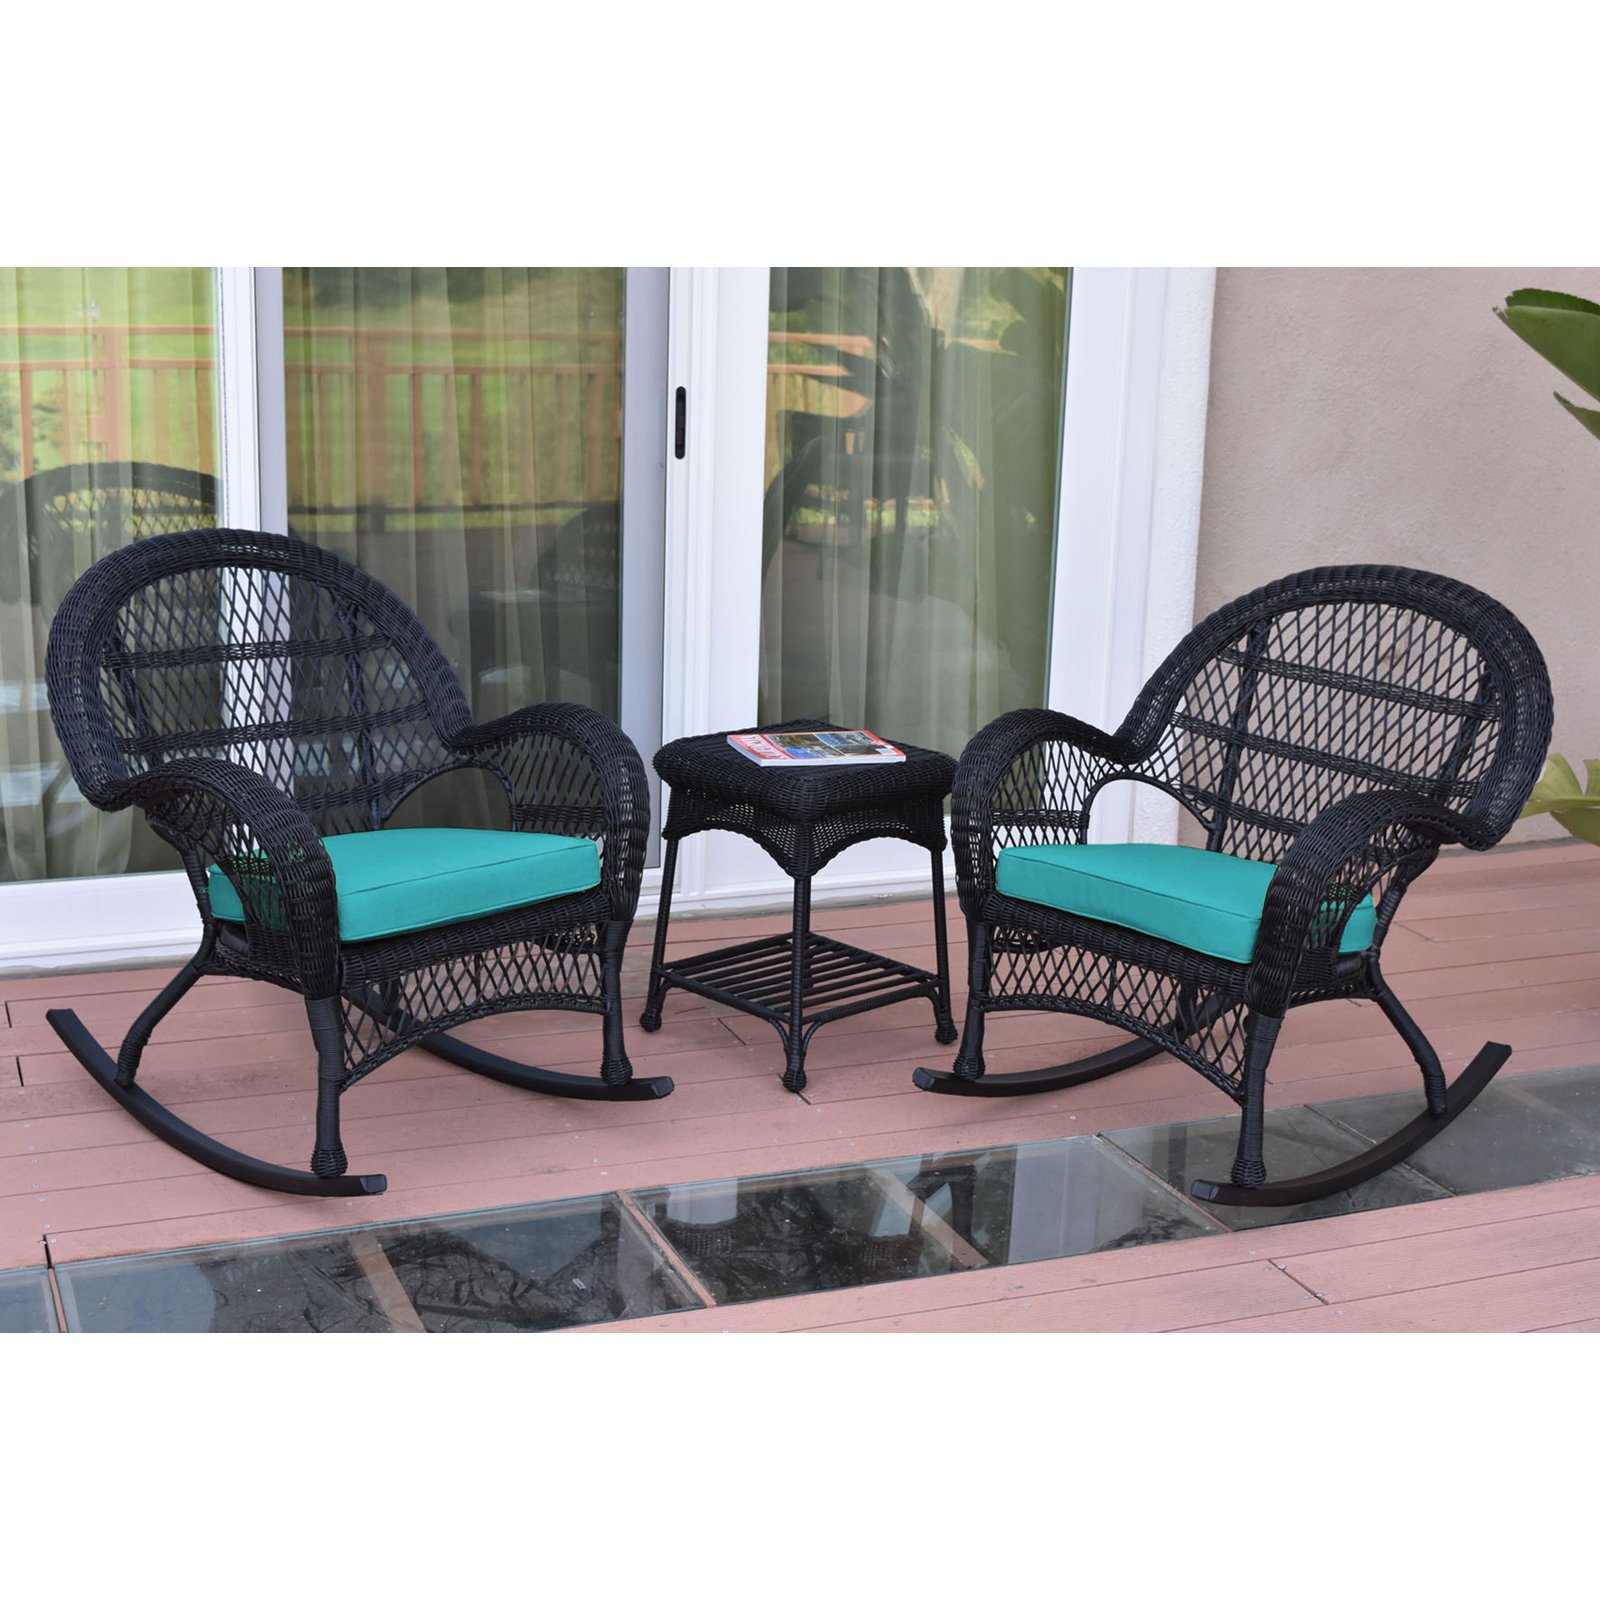 Jeco Santa Maria 3 Piece Wicker Rocker Chat Set with Optional Cushion - image 1 of 11